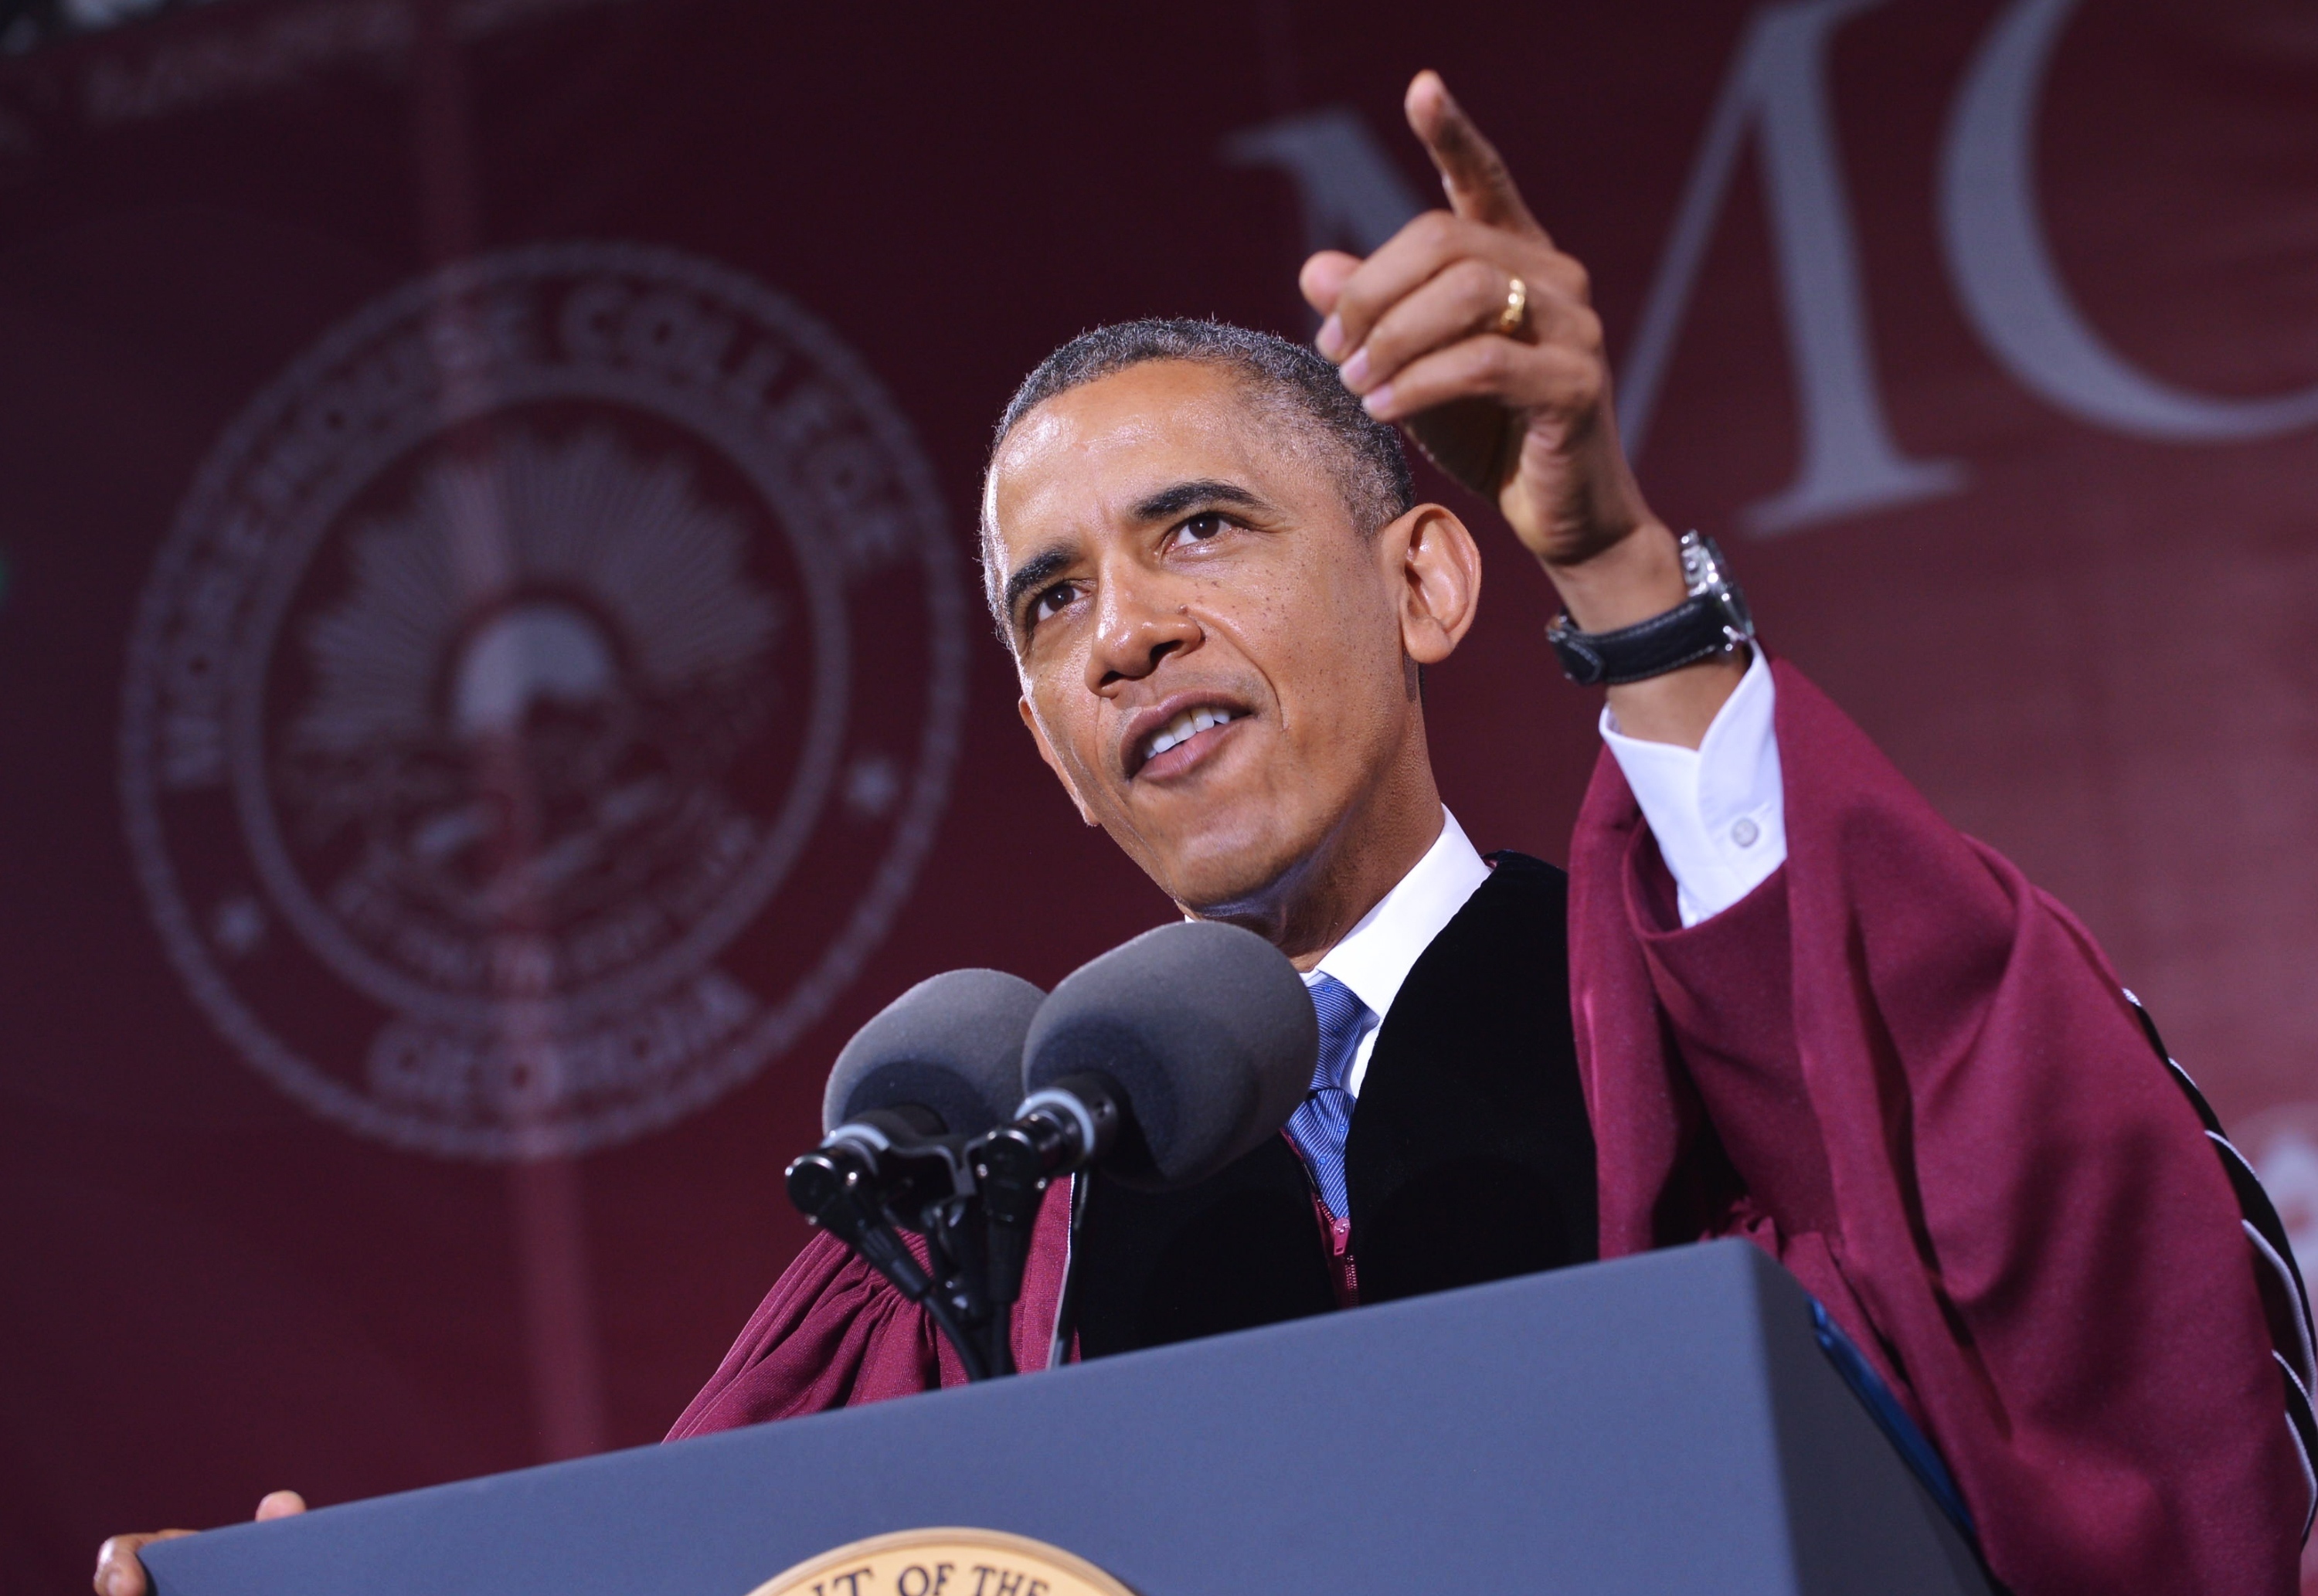 President Obama delivers the commencement address during a ceremony at Morehouse College on Sunday in Atlanta, Georgia.